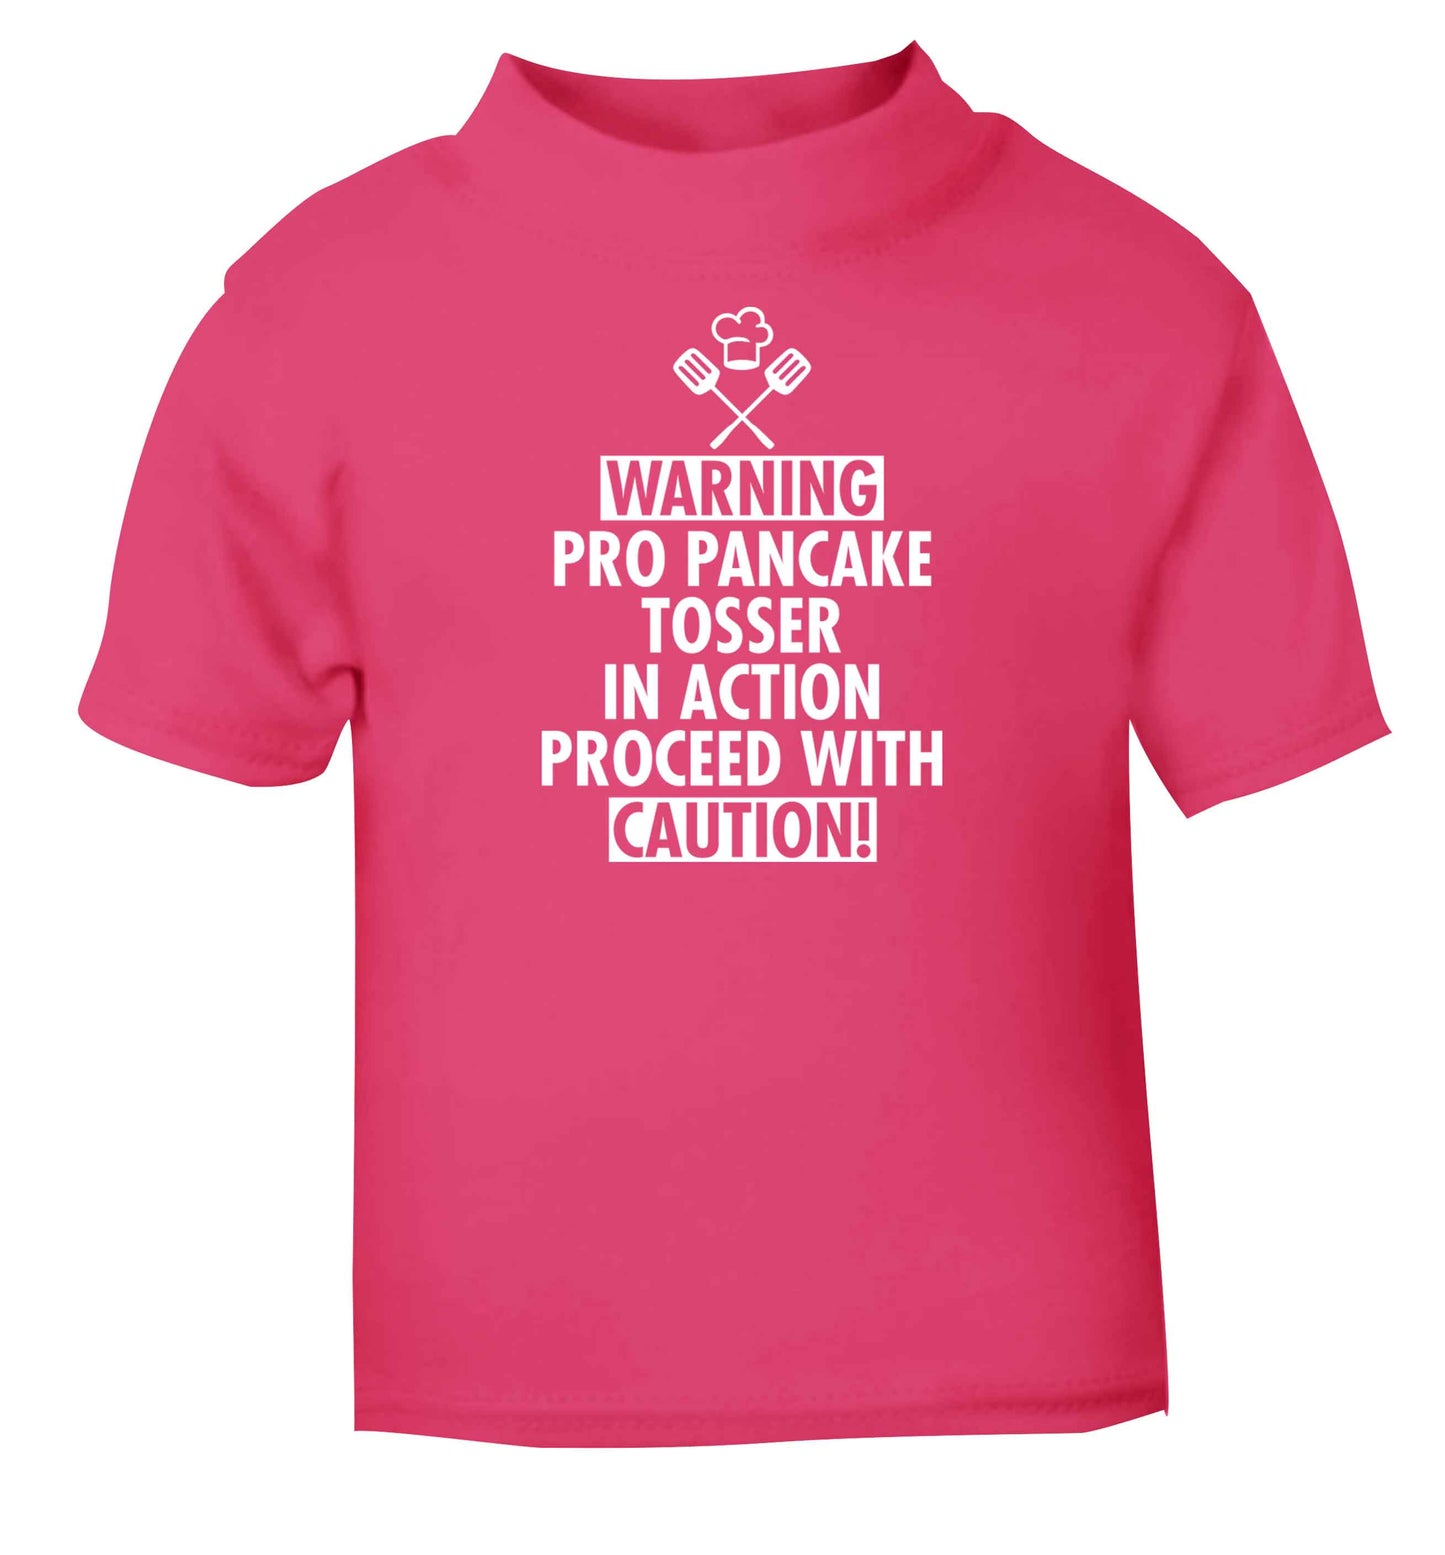 Warning pro pancake tosser in action proceed with caution pink baby toddler Tshirt 2 Years